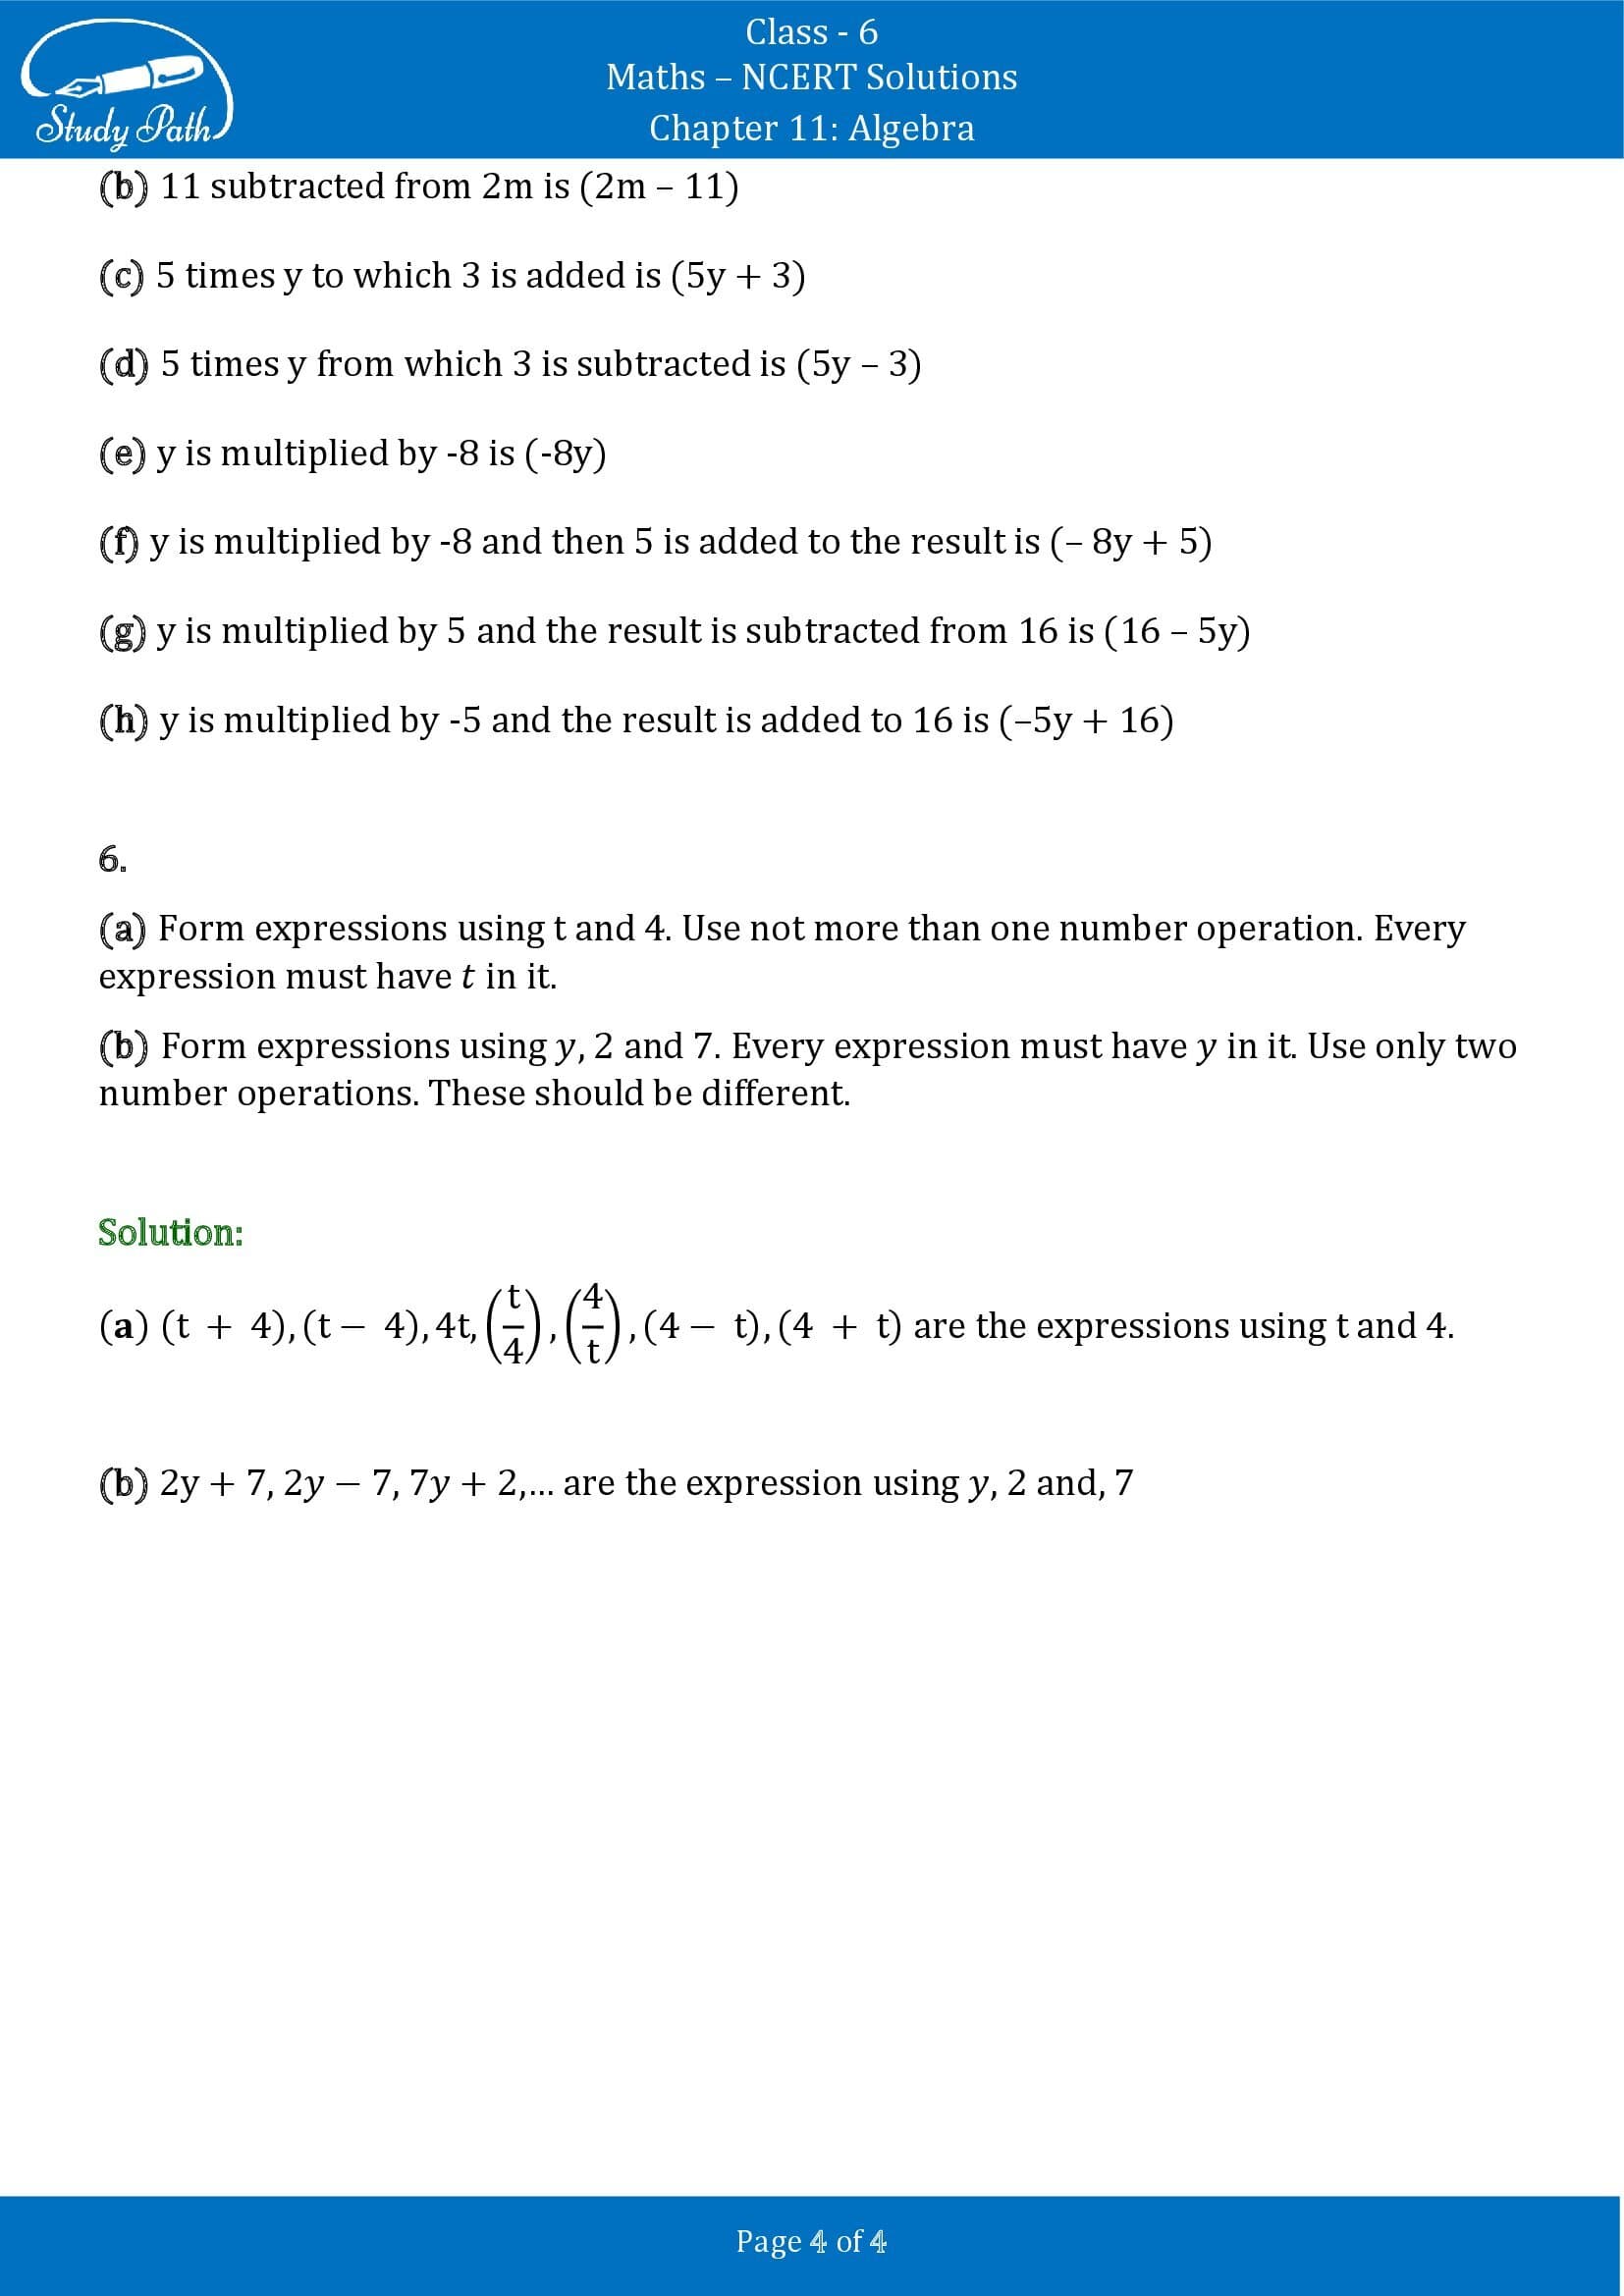 NCERT Solutions for Class 6 Maths Chapter 11 Algebra Exercise 11.3 00004